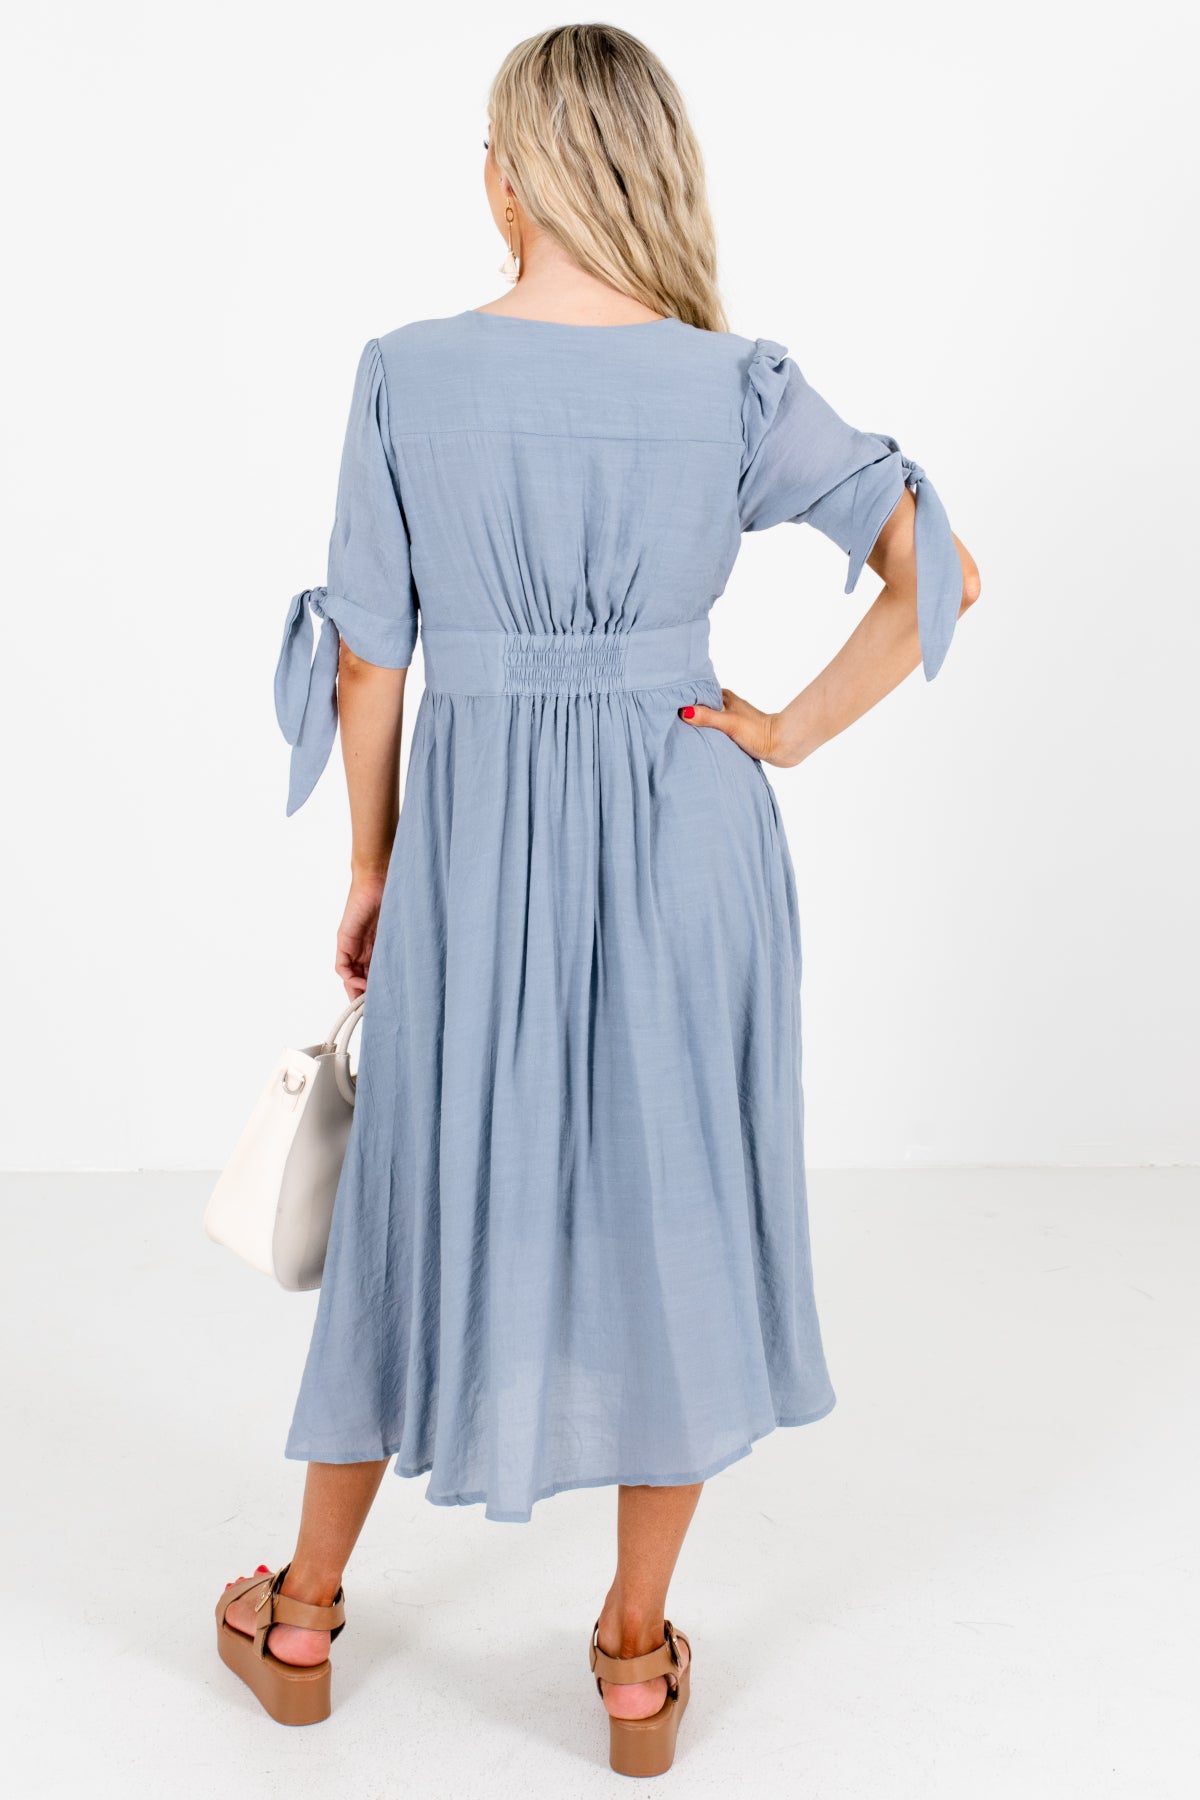 Women's Blue Pleated Accented Boutique Midi Dresses